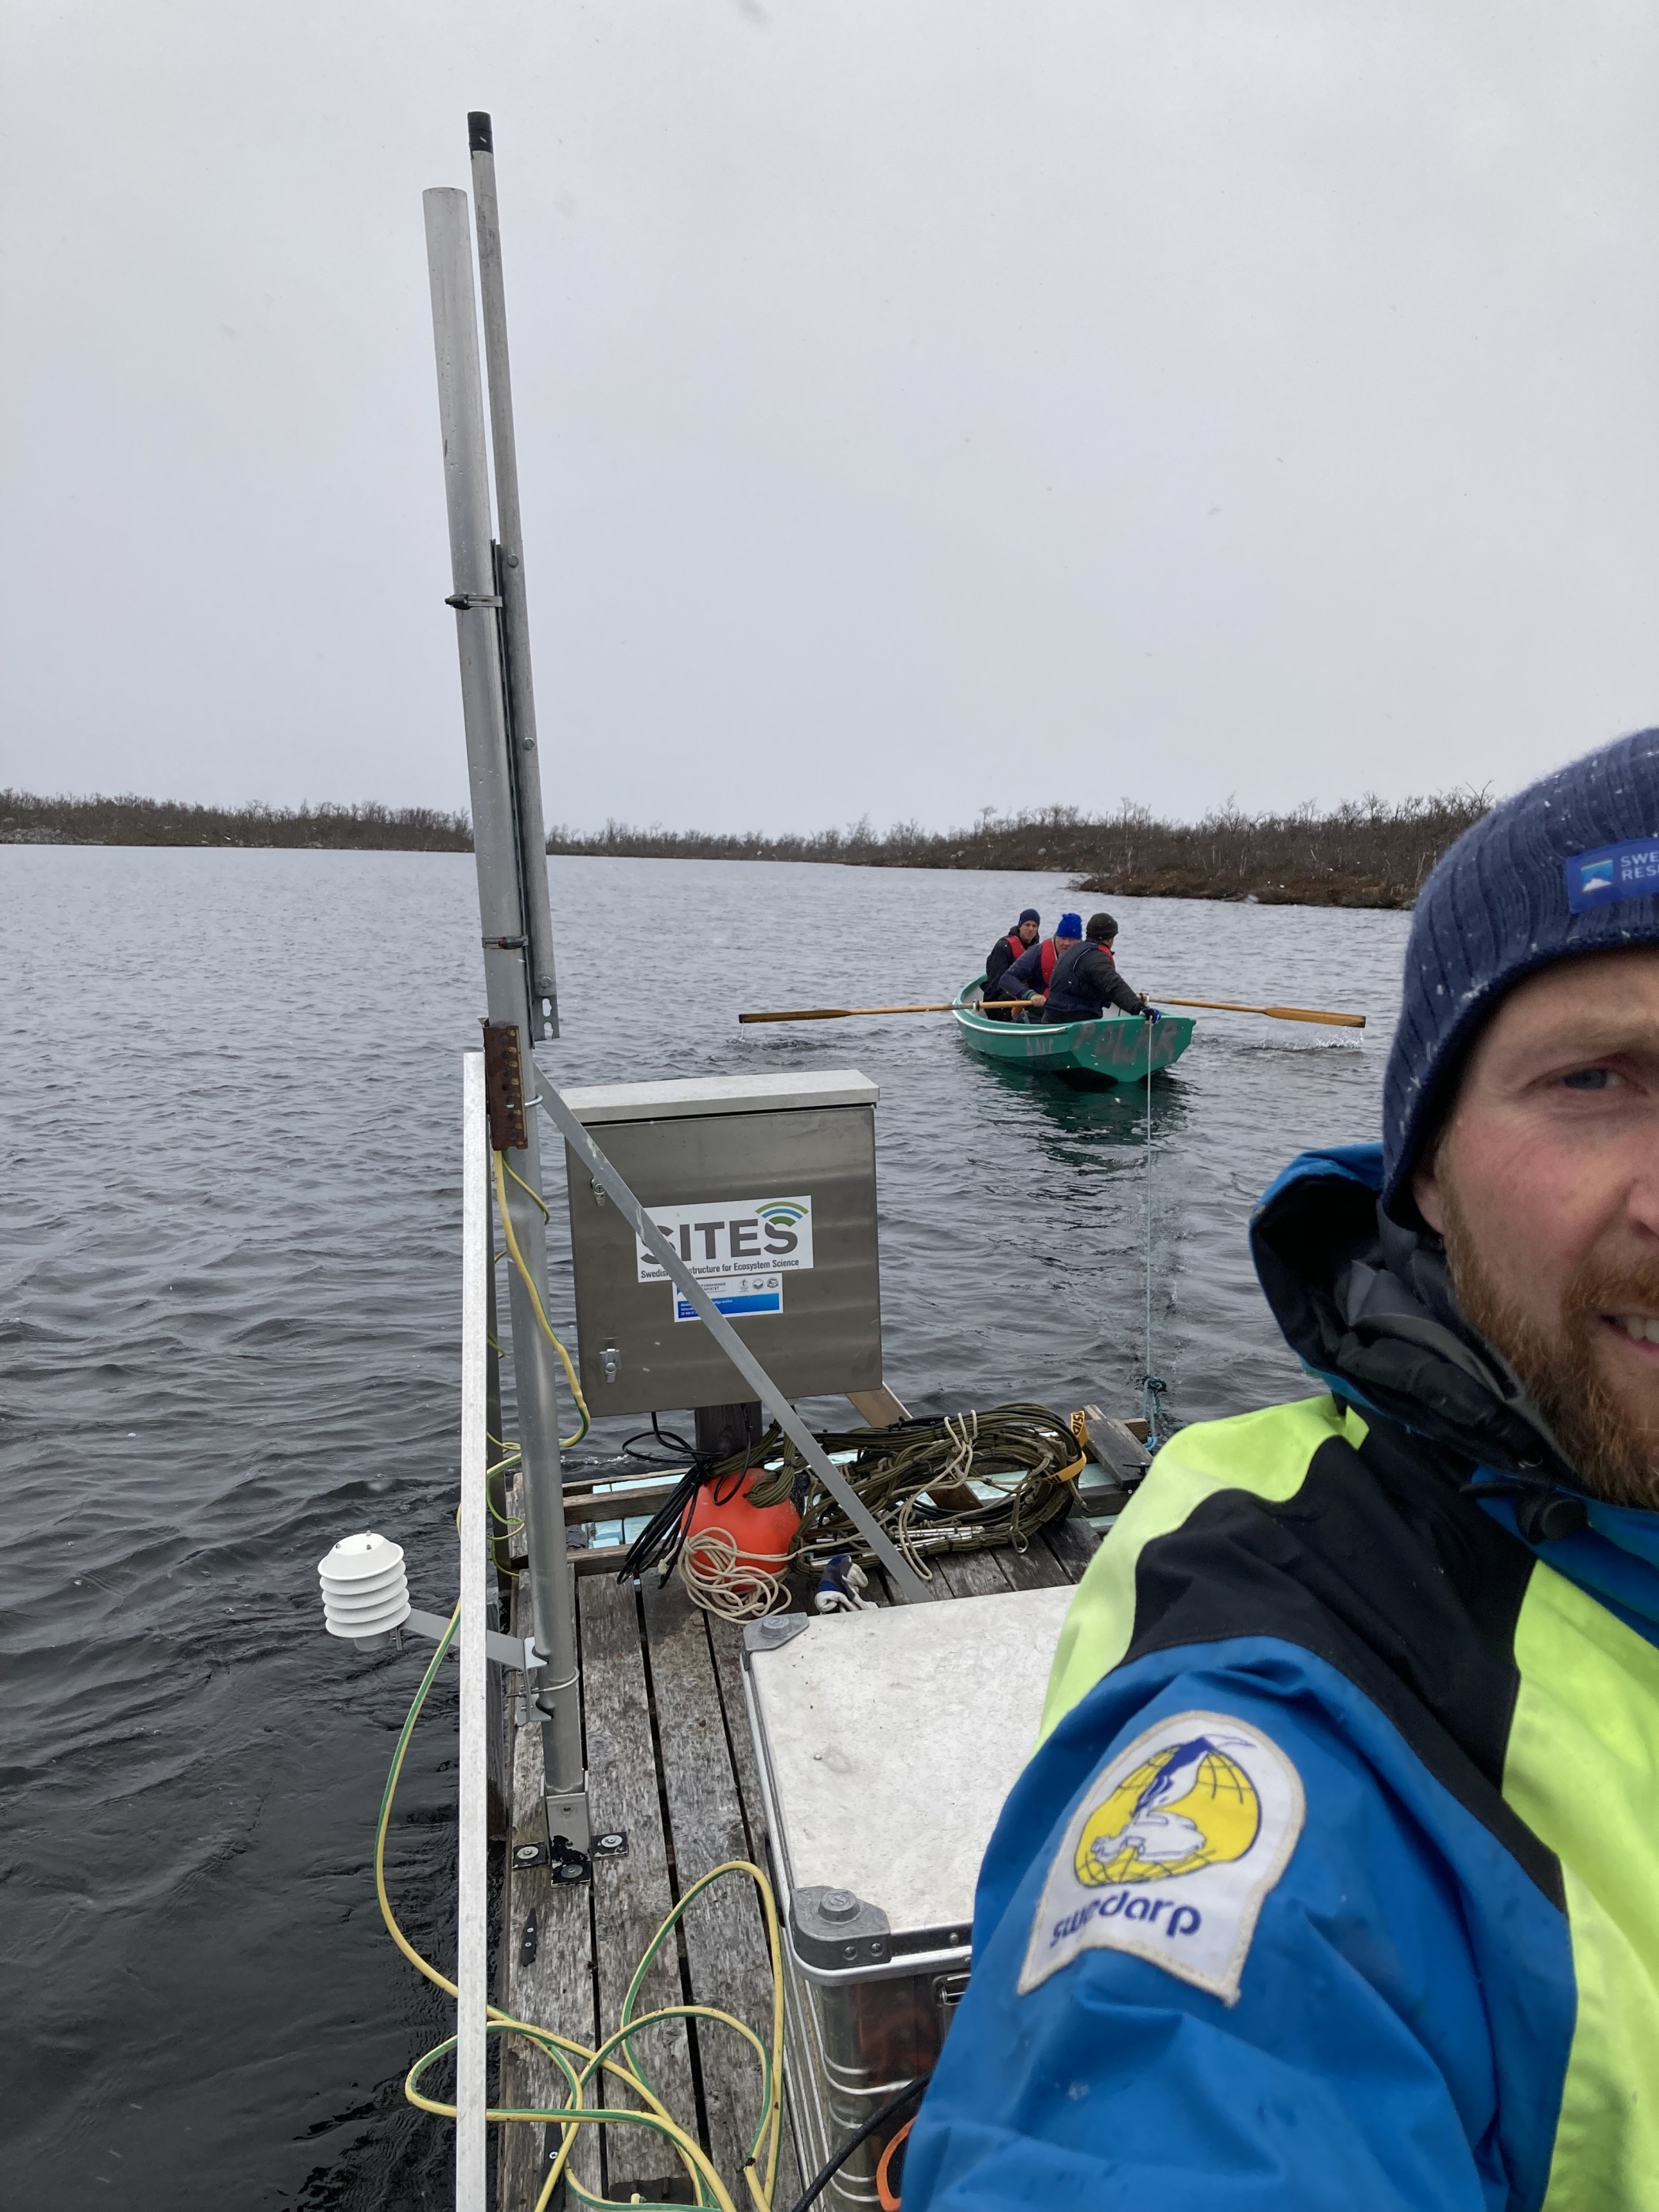 Niklas Rakos, research engineer at the Abisko Scientific Research Station, on the raft that has been towed out and installed on Lake Almbergasjön. (Photo: Niklas Rakos).